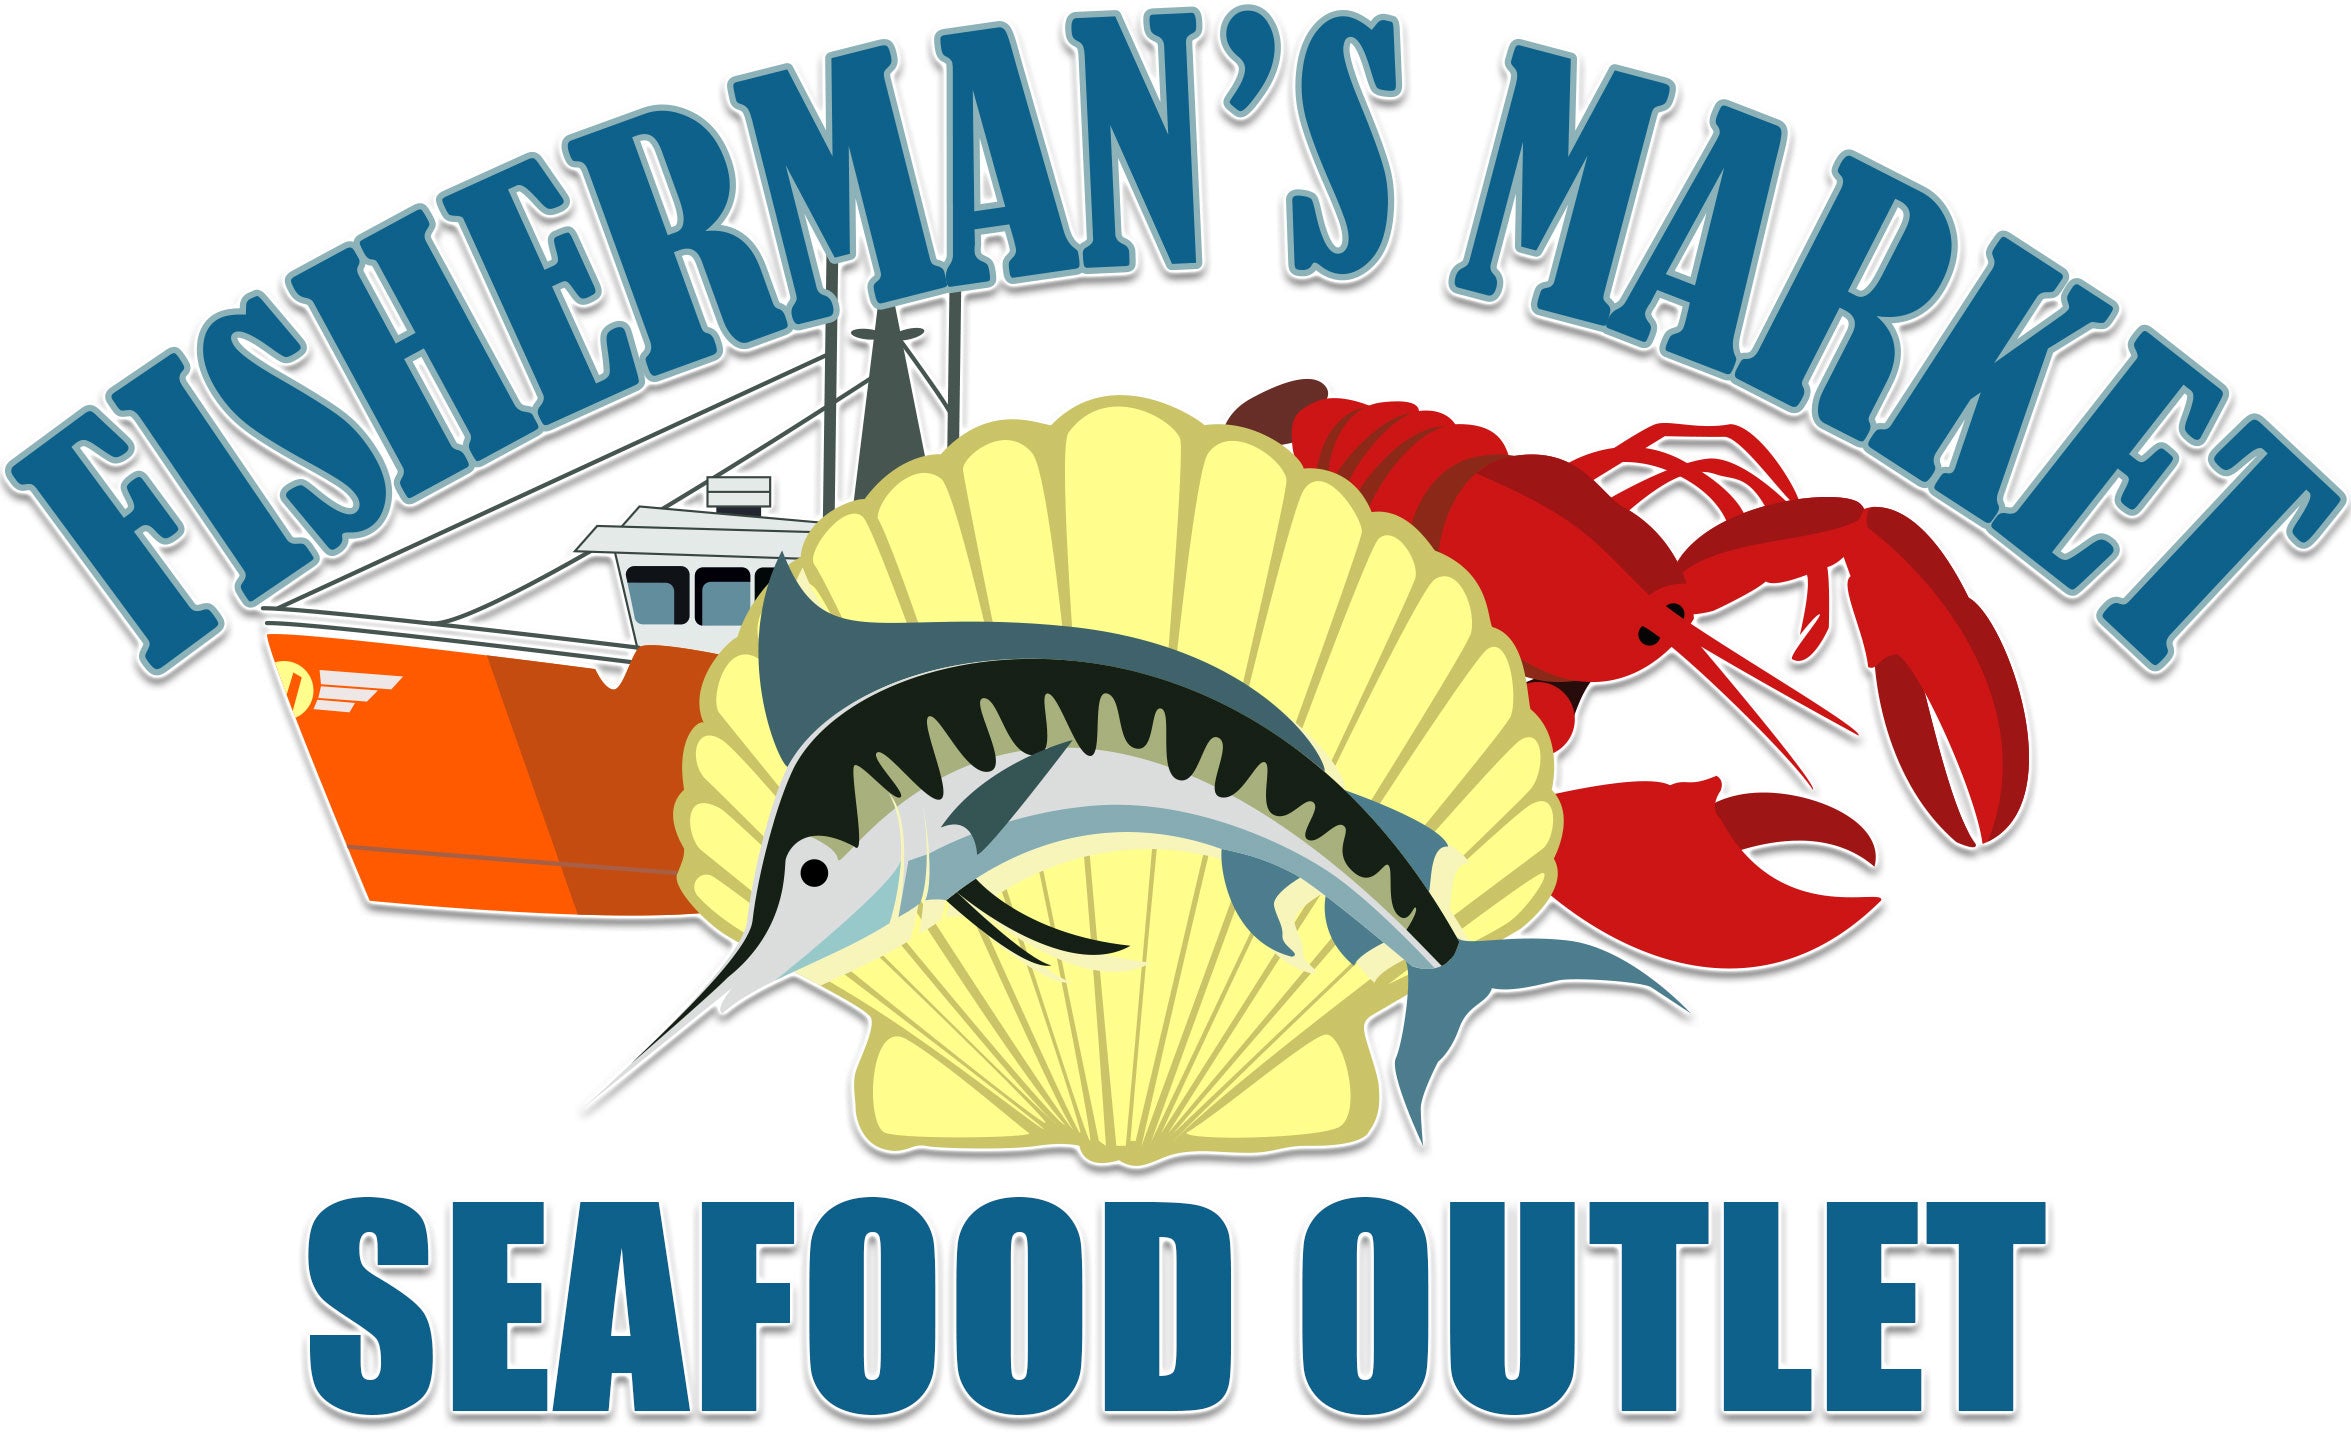 Fisherman's Factory Outlet